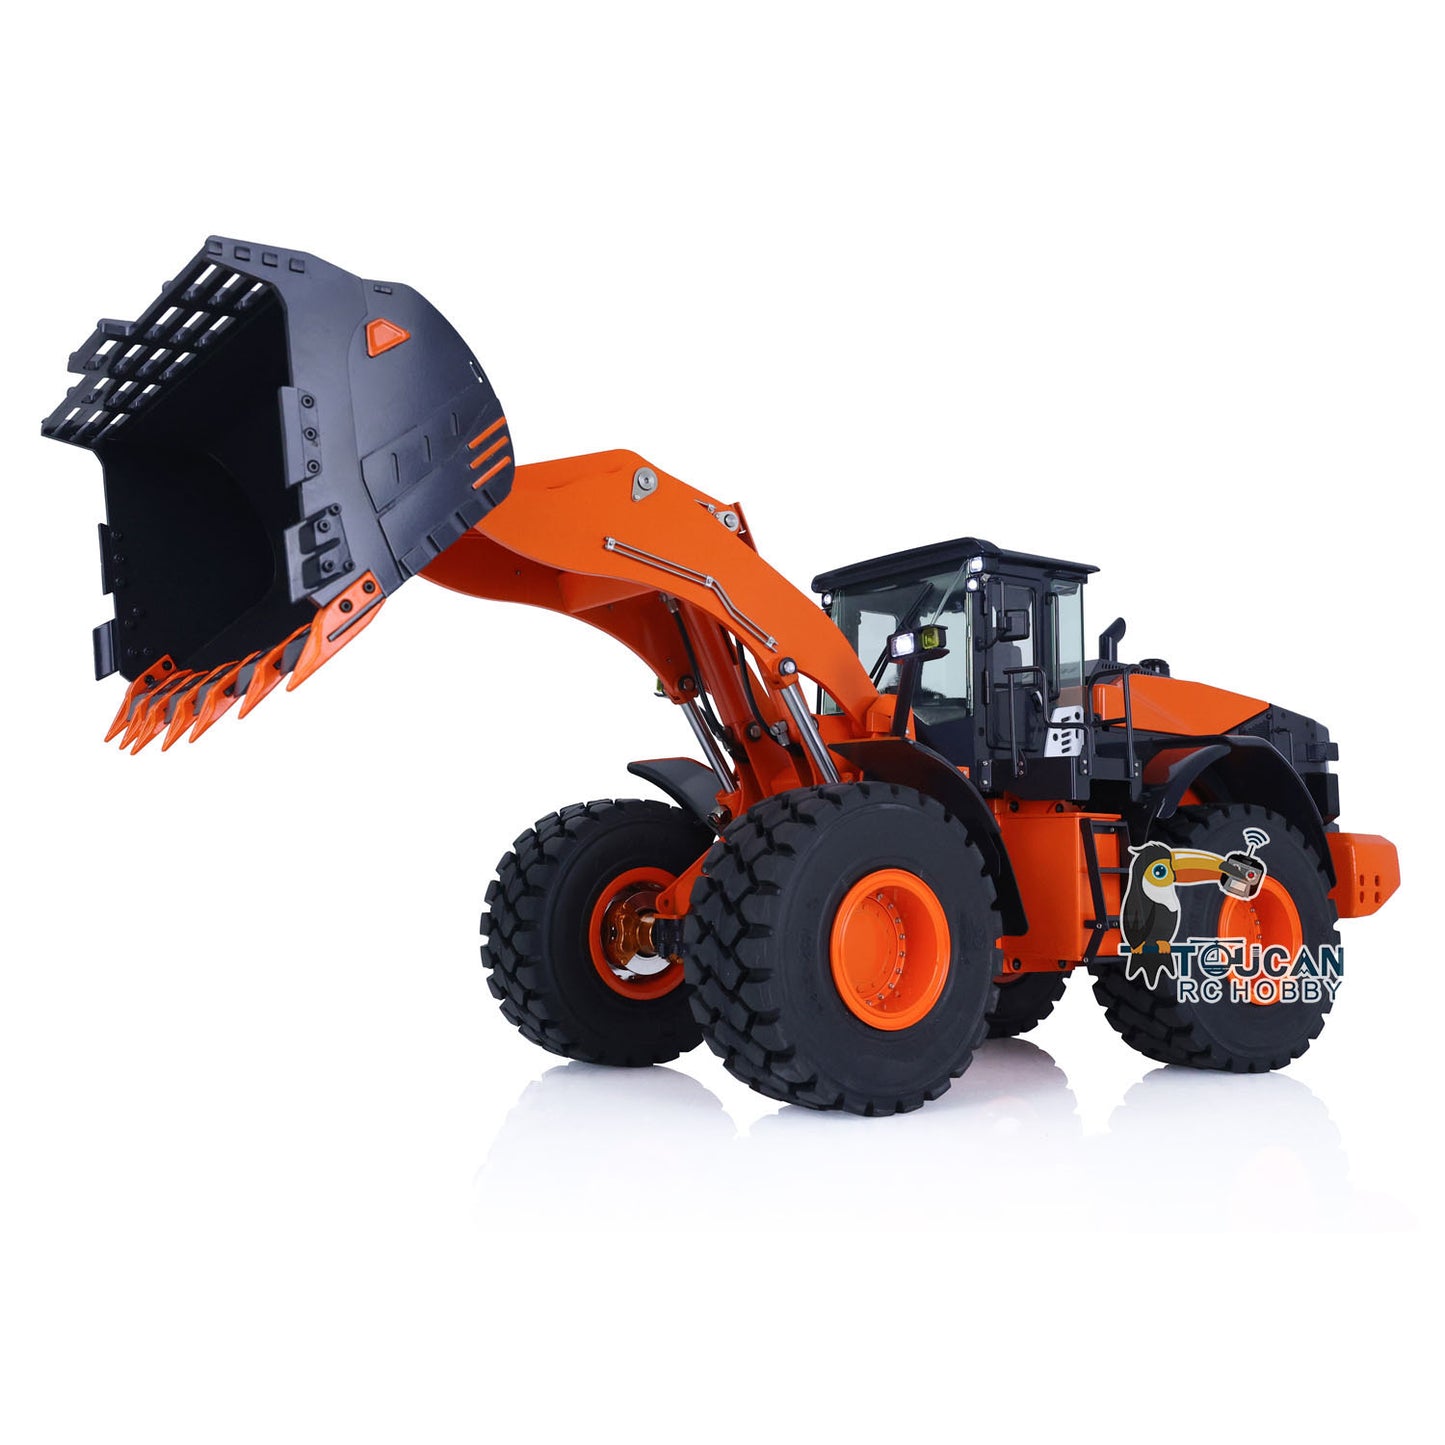 JDMODEL Metal Hydraulic Loader JDM-198 1/14 RC RTR Construction Vehicles ZW370 Car Models 2-Speed Transmission Battery